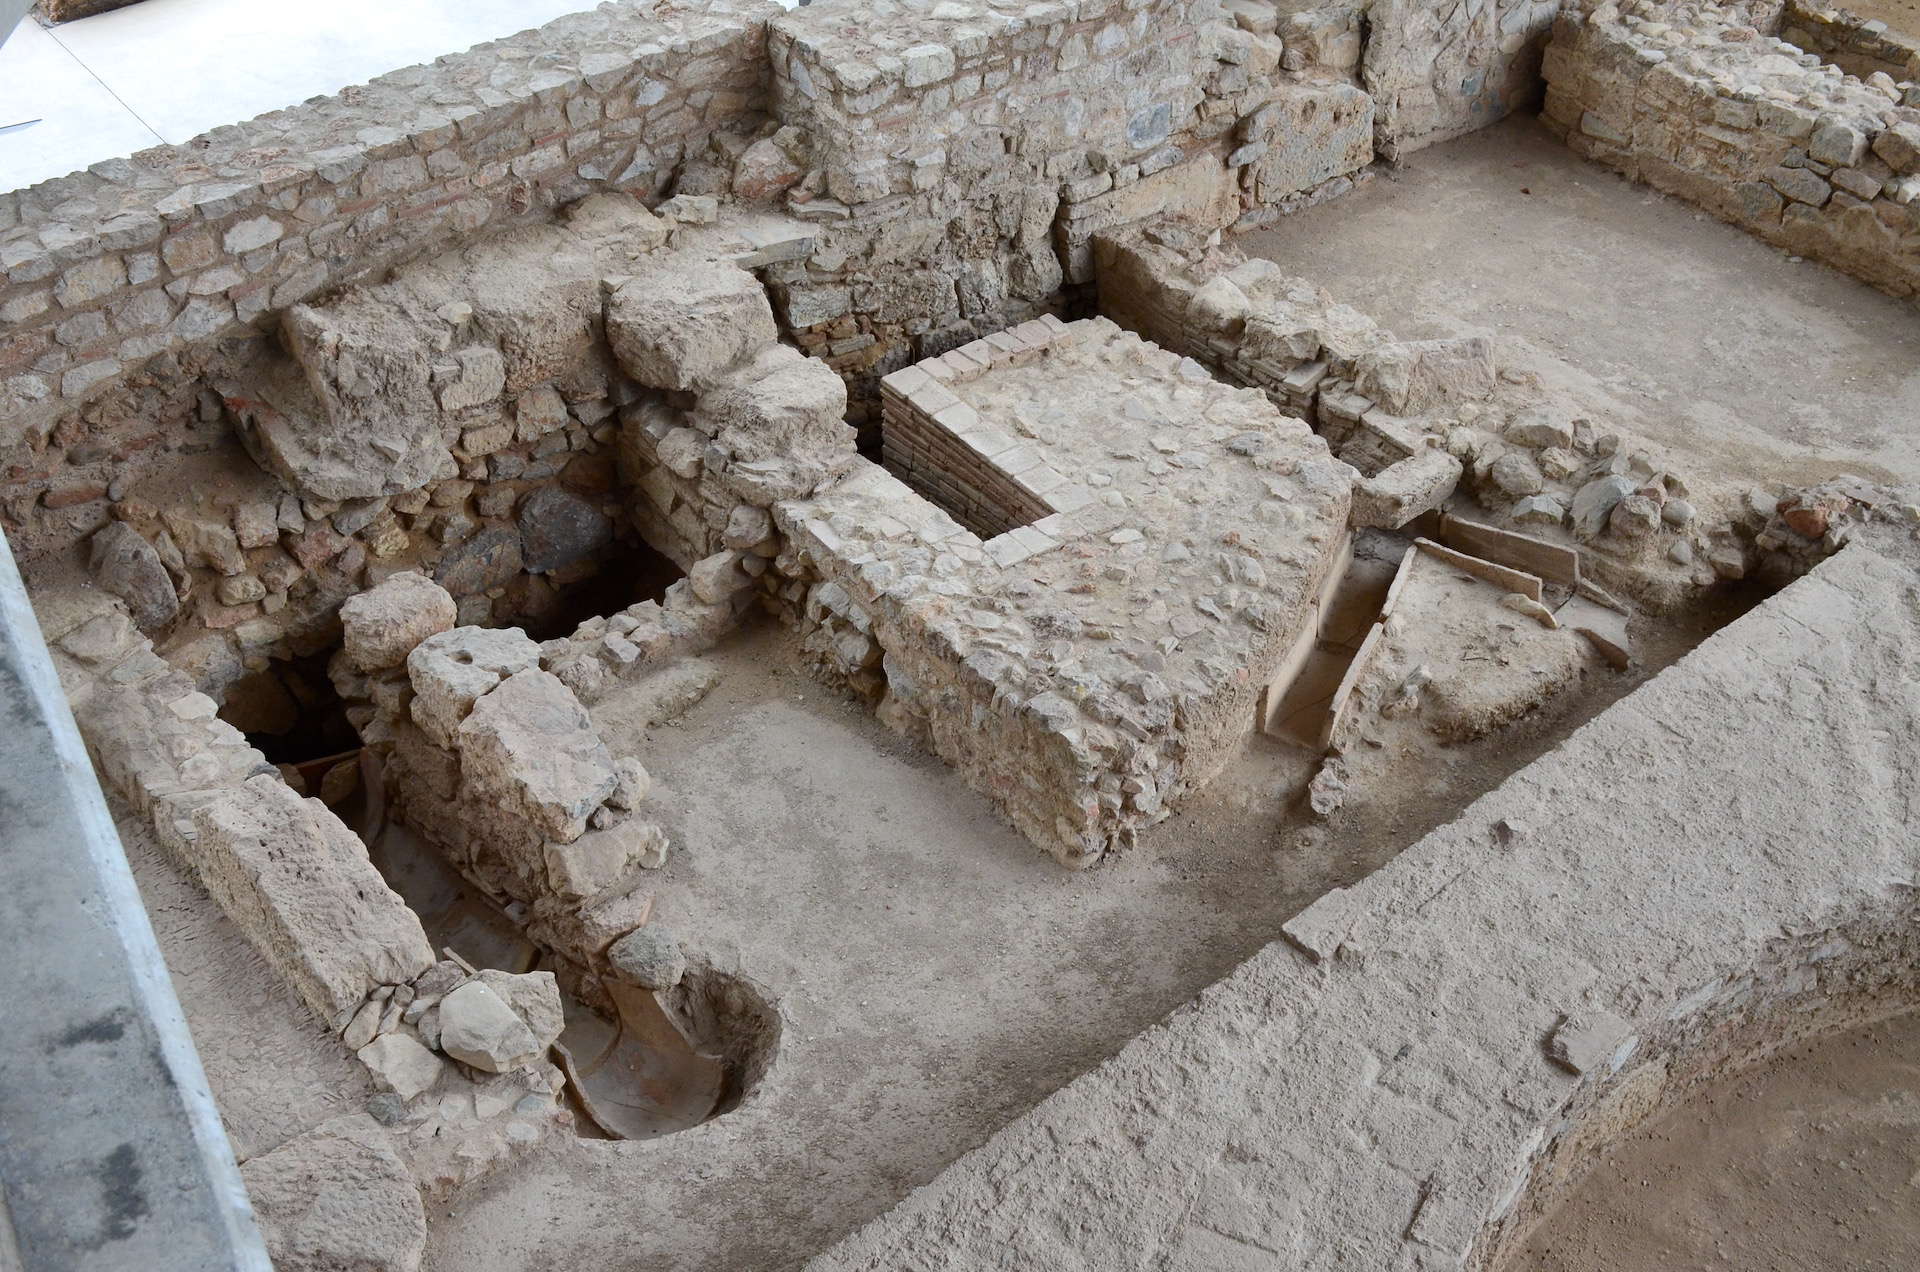 Public latrines in the archaeological site at the Acropolis Museum in Athens, Greece